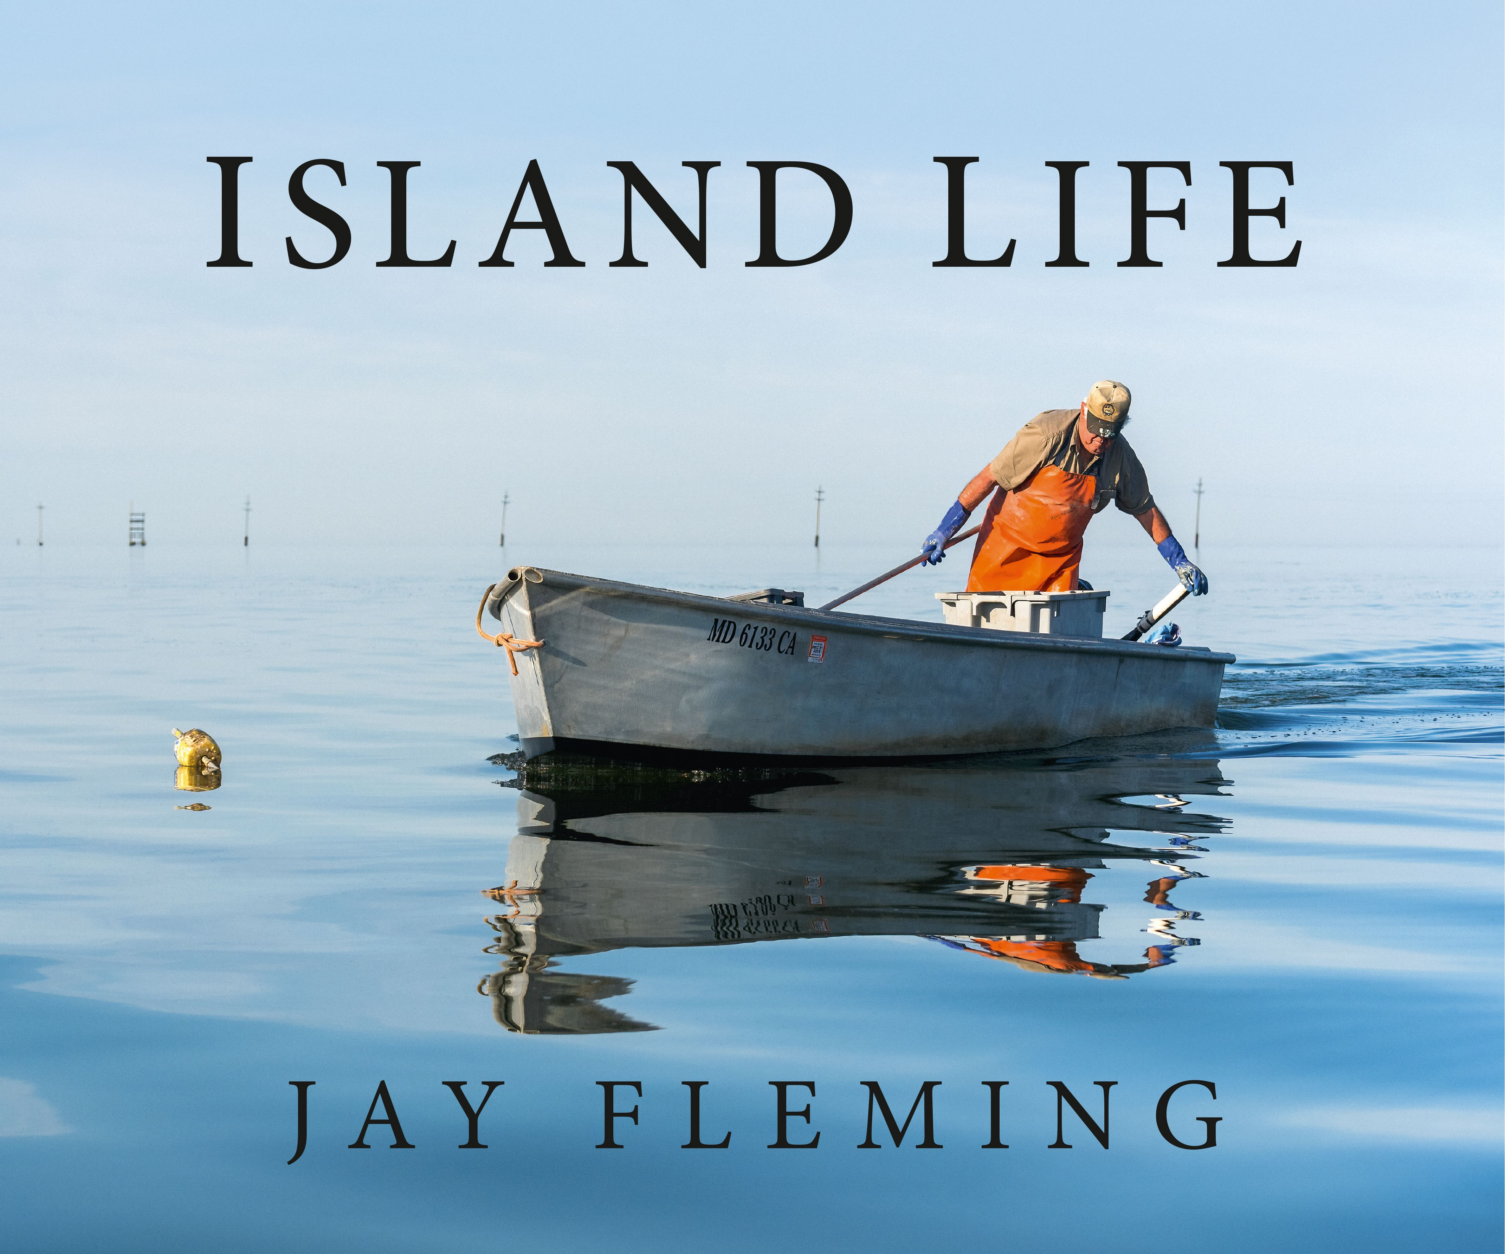 <p>Fleming is optimistic despite documenting a way of life that may disappear like some communities have in the past.</p>
<p>He hopes his book will inspire &#8220;preservation of the shorelines, preservation of the environment on these islands, and ultimately, preservation of the communities. That&#8217;d be incredible.&#8221;</p>
<p>&#8220;Island Life&#8221; is produced and published by Fleming himself, and he is spending the holiday season promoting it at signing events throughout the coming months.</p>
<p>&#8220;You can catch me at a book signing event. I&#8217;ll be doing quite a few in the Annapolis area before the holidays, and then I&#8217;ll be doing some studio hours at my studio in Kent Island, right before Christmas.&#8221;</p>
<p><a href="http://www.jayflemingphotography.com/about" target="_blank" rel="noopener noreferrer">Find out more on Fleming&#8217;s website</a>.</p>
